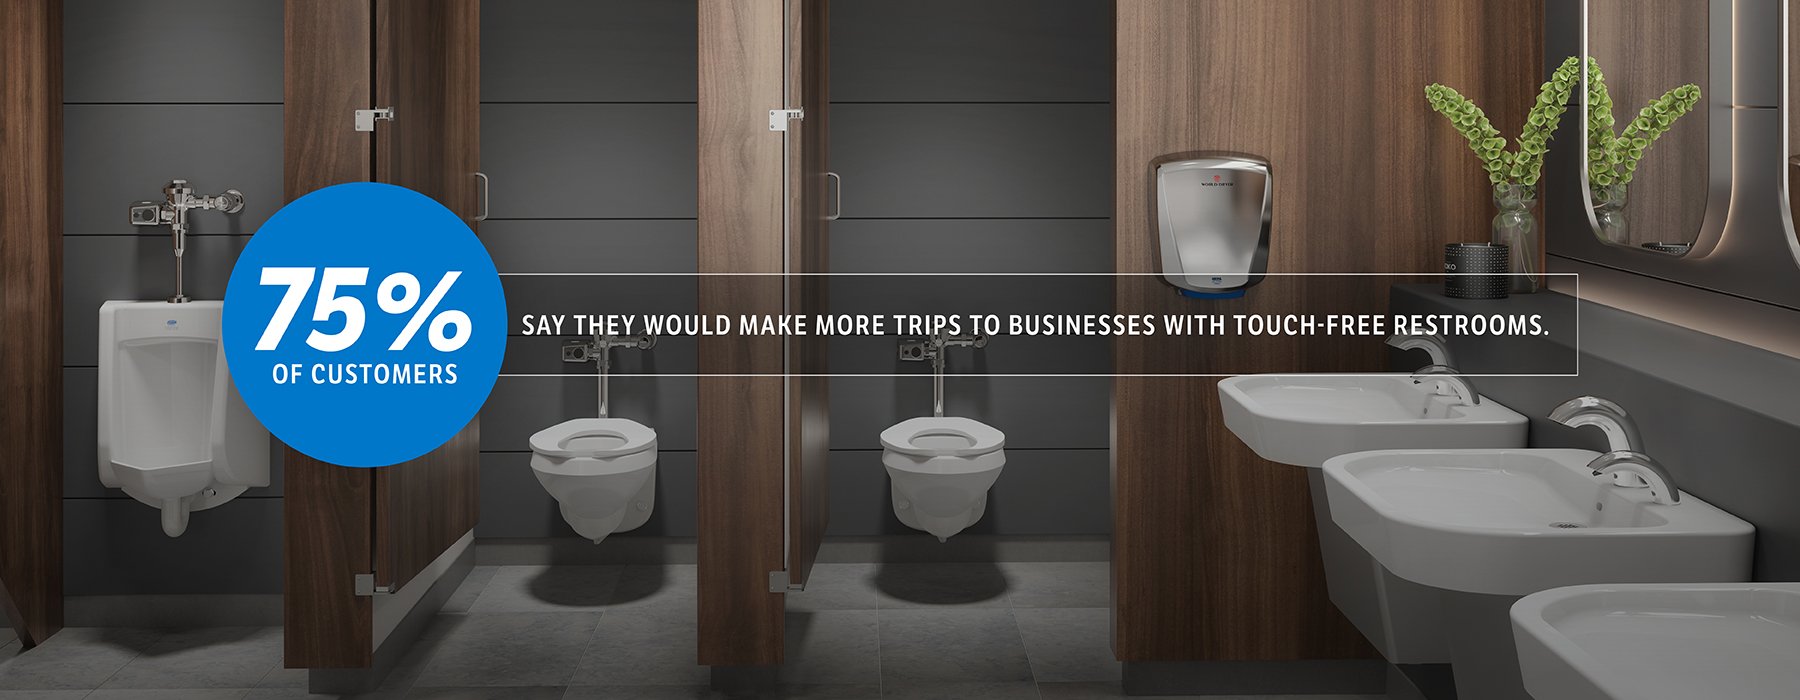 000-052 Restroom Experience Survey - Blog Post Graphics 1800x700px_01